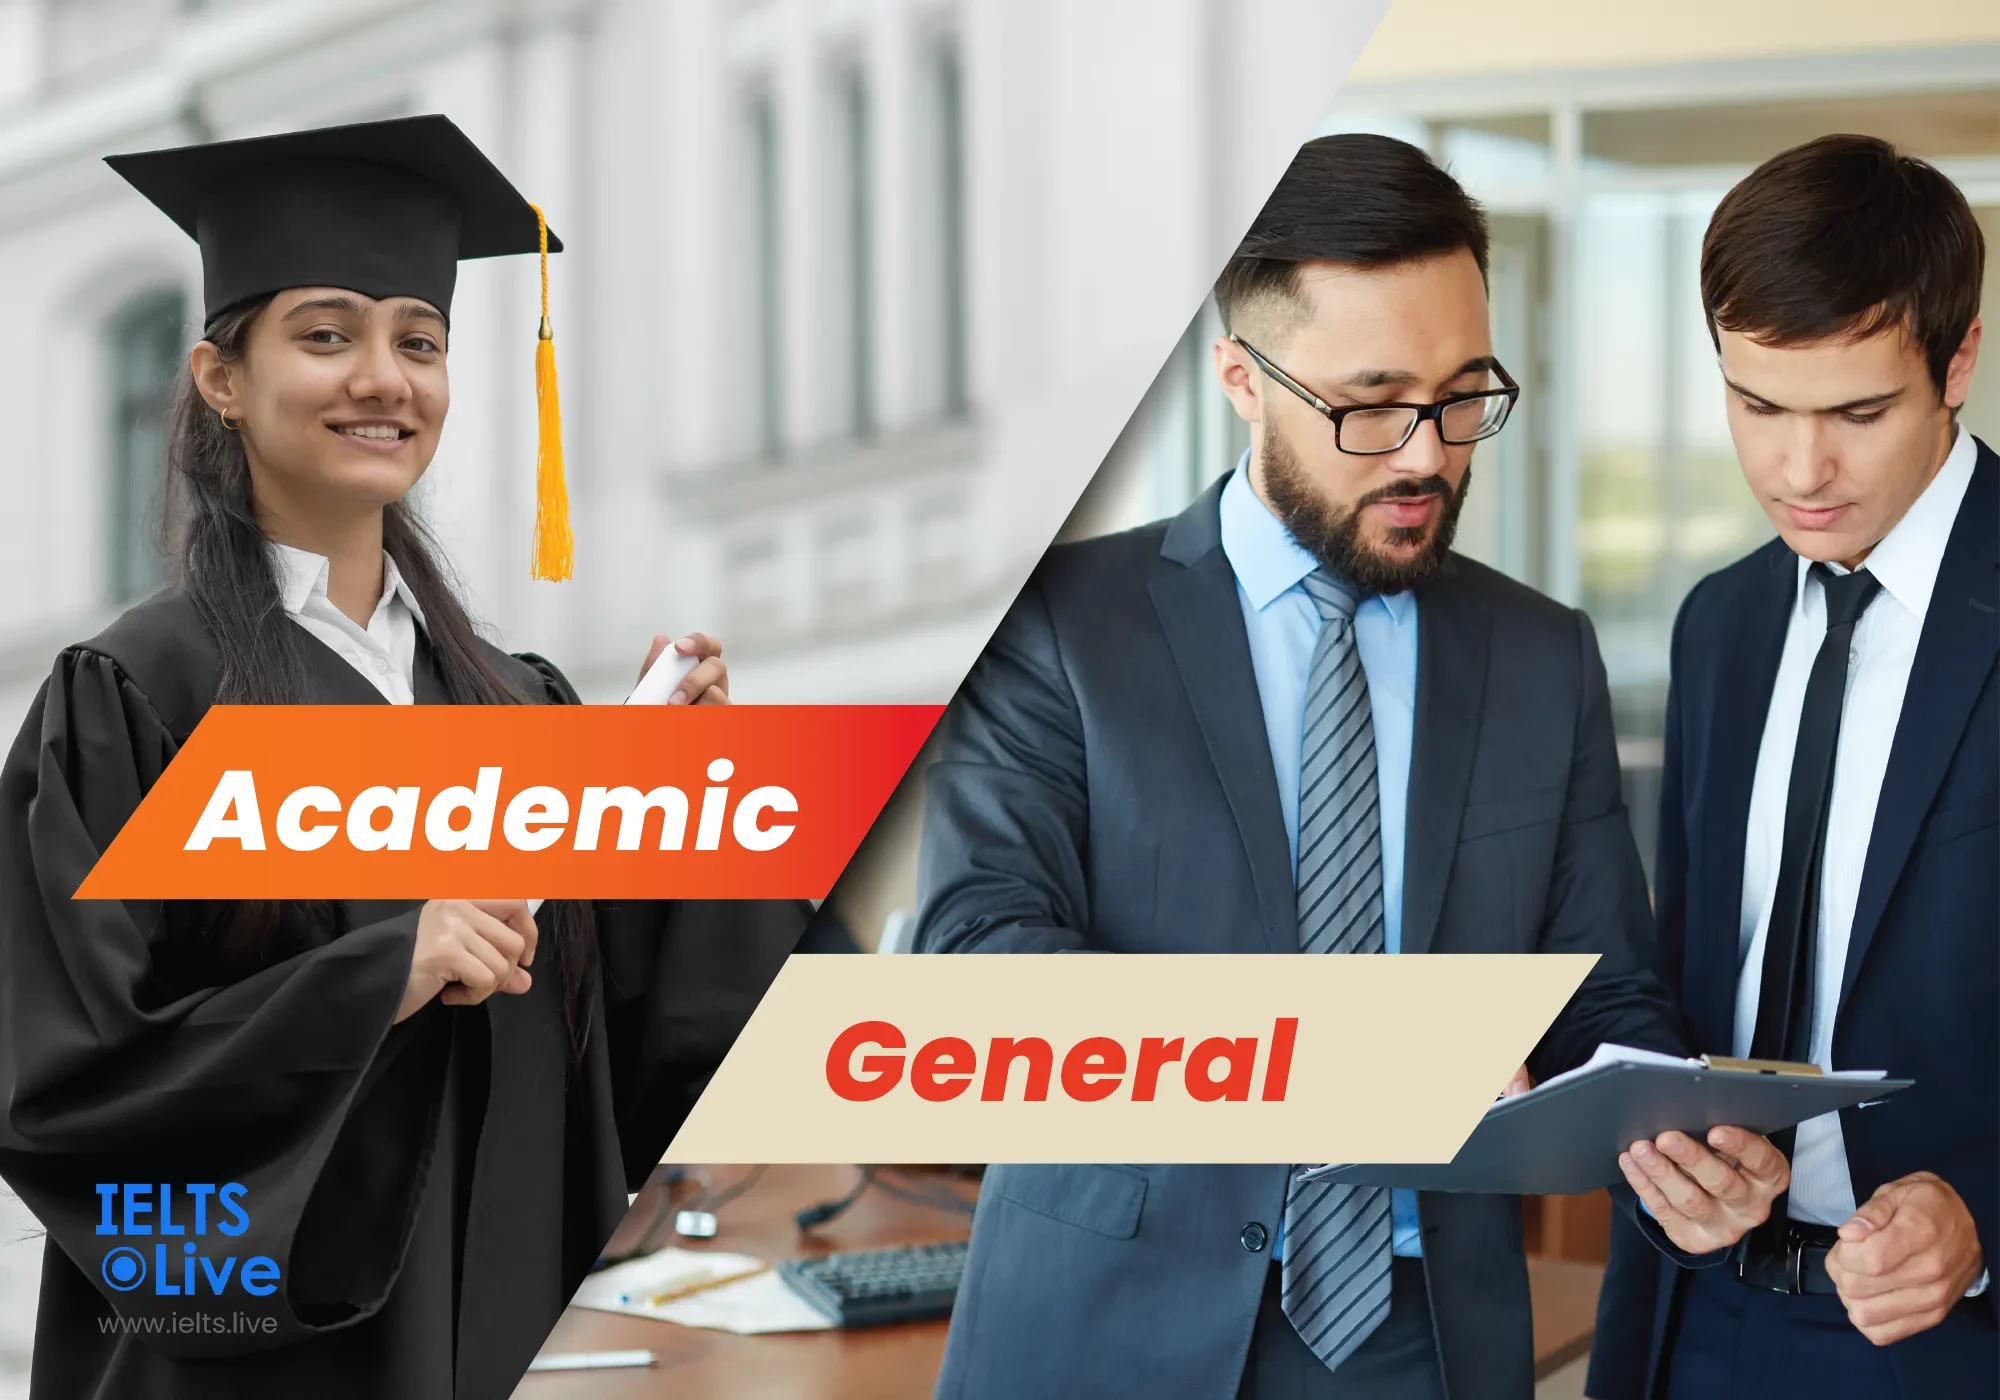 IELTS Academic Vs. General Training: What to Choose?